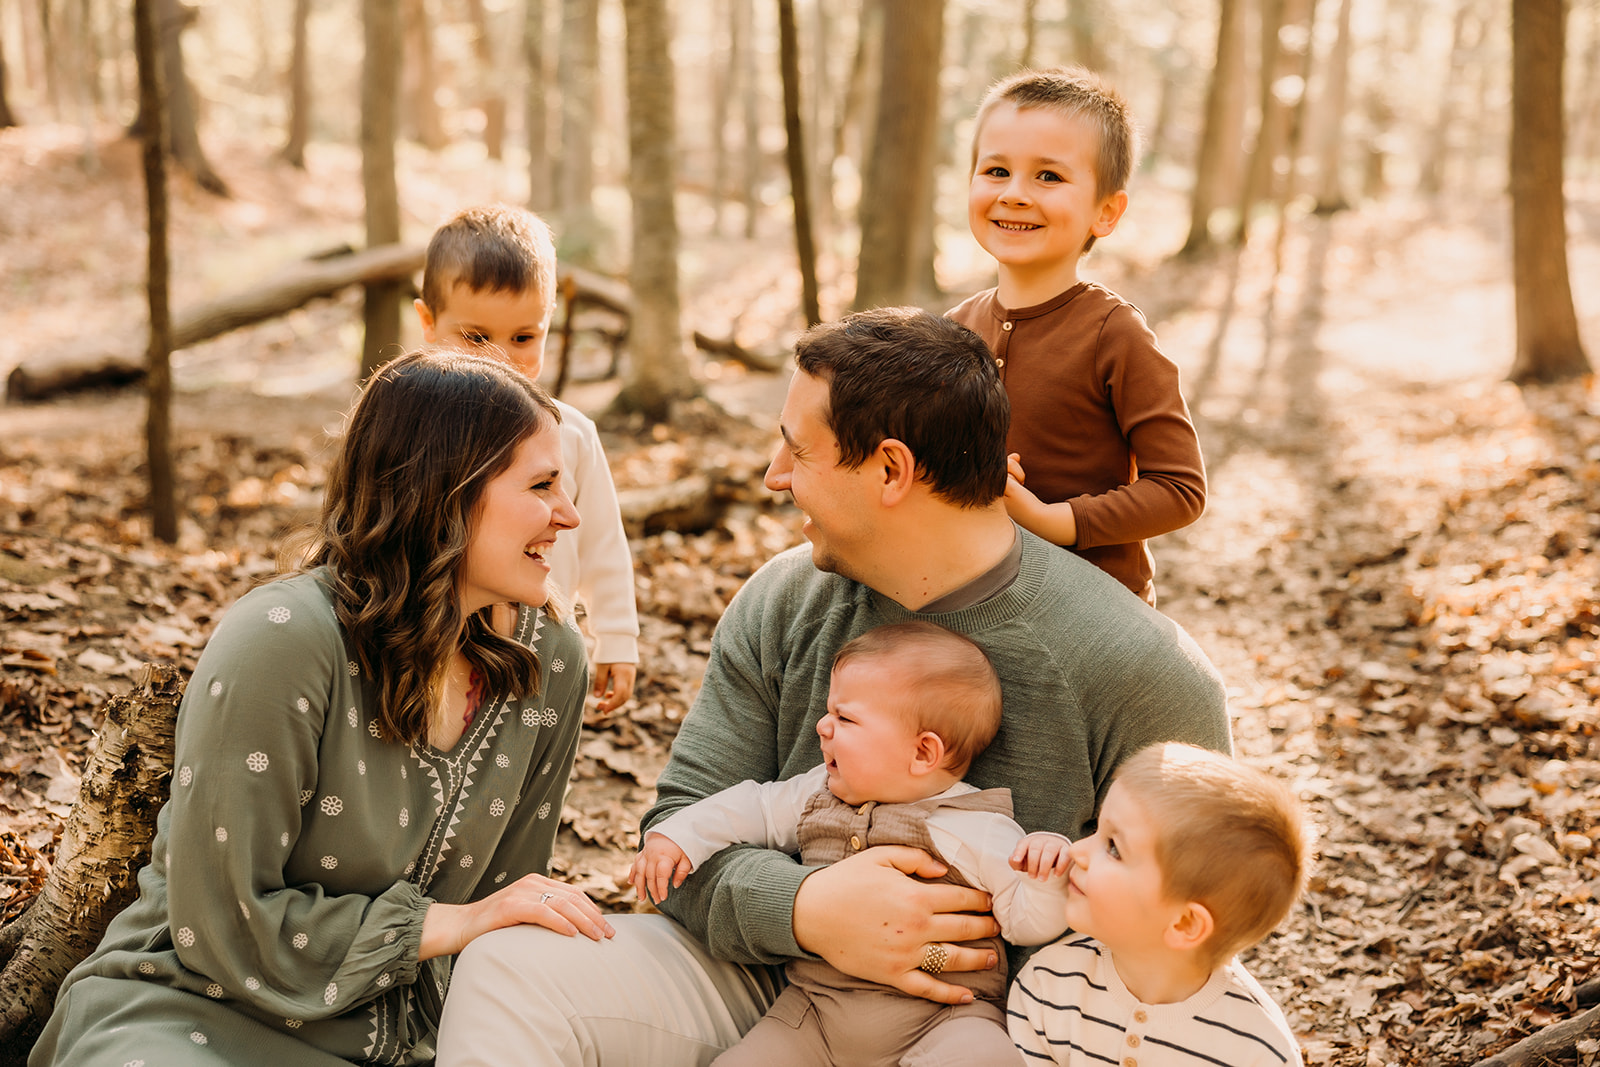 Harmony in nature: A family photoshoot in the Ottawa Forest